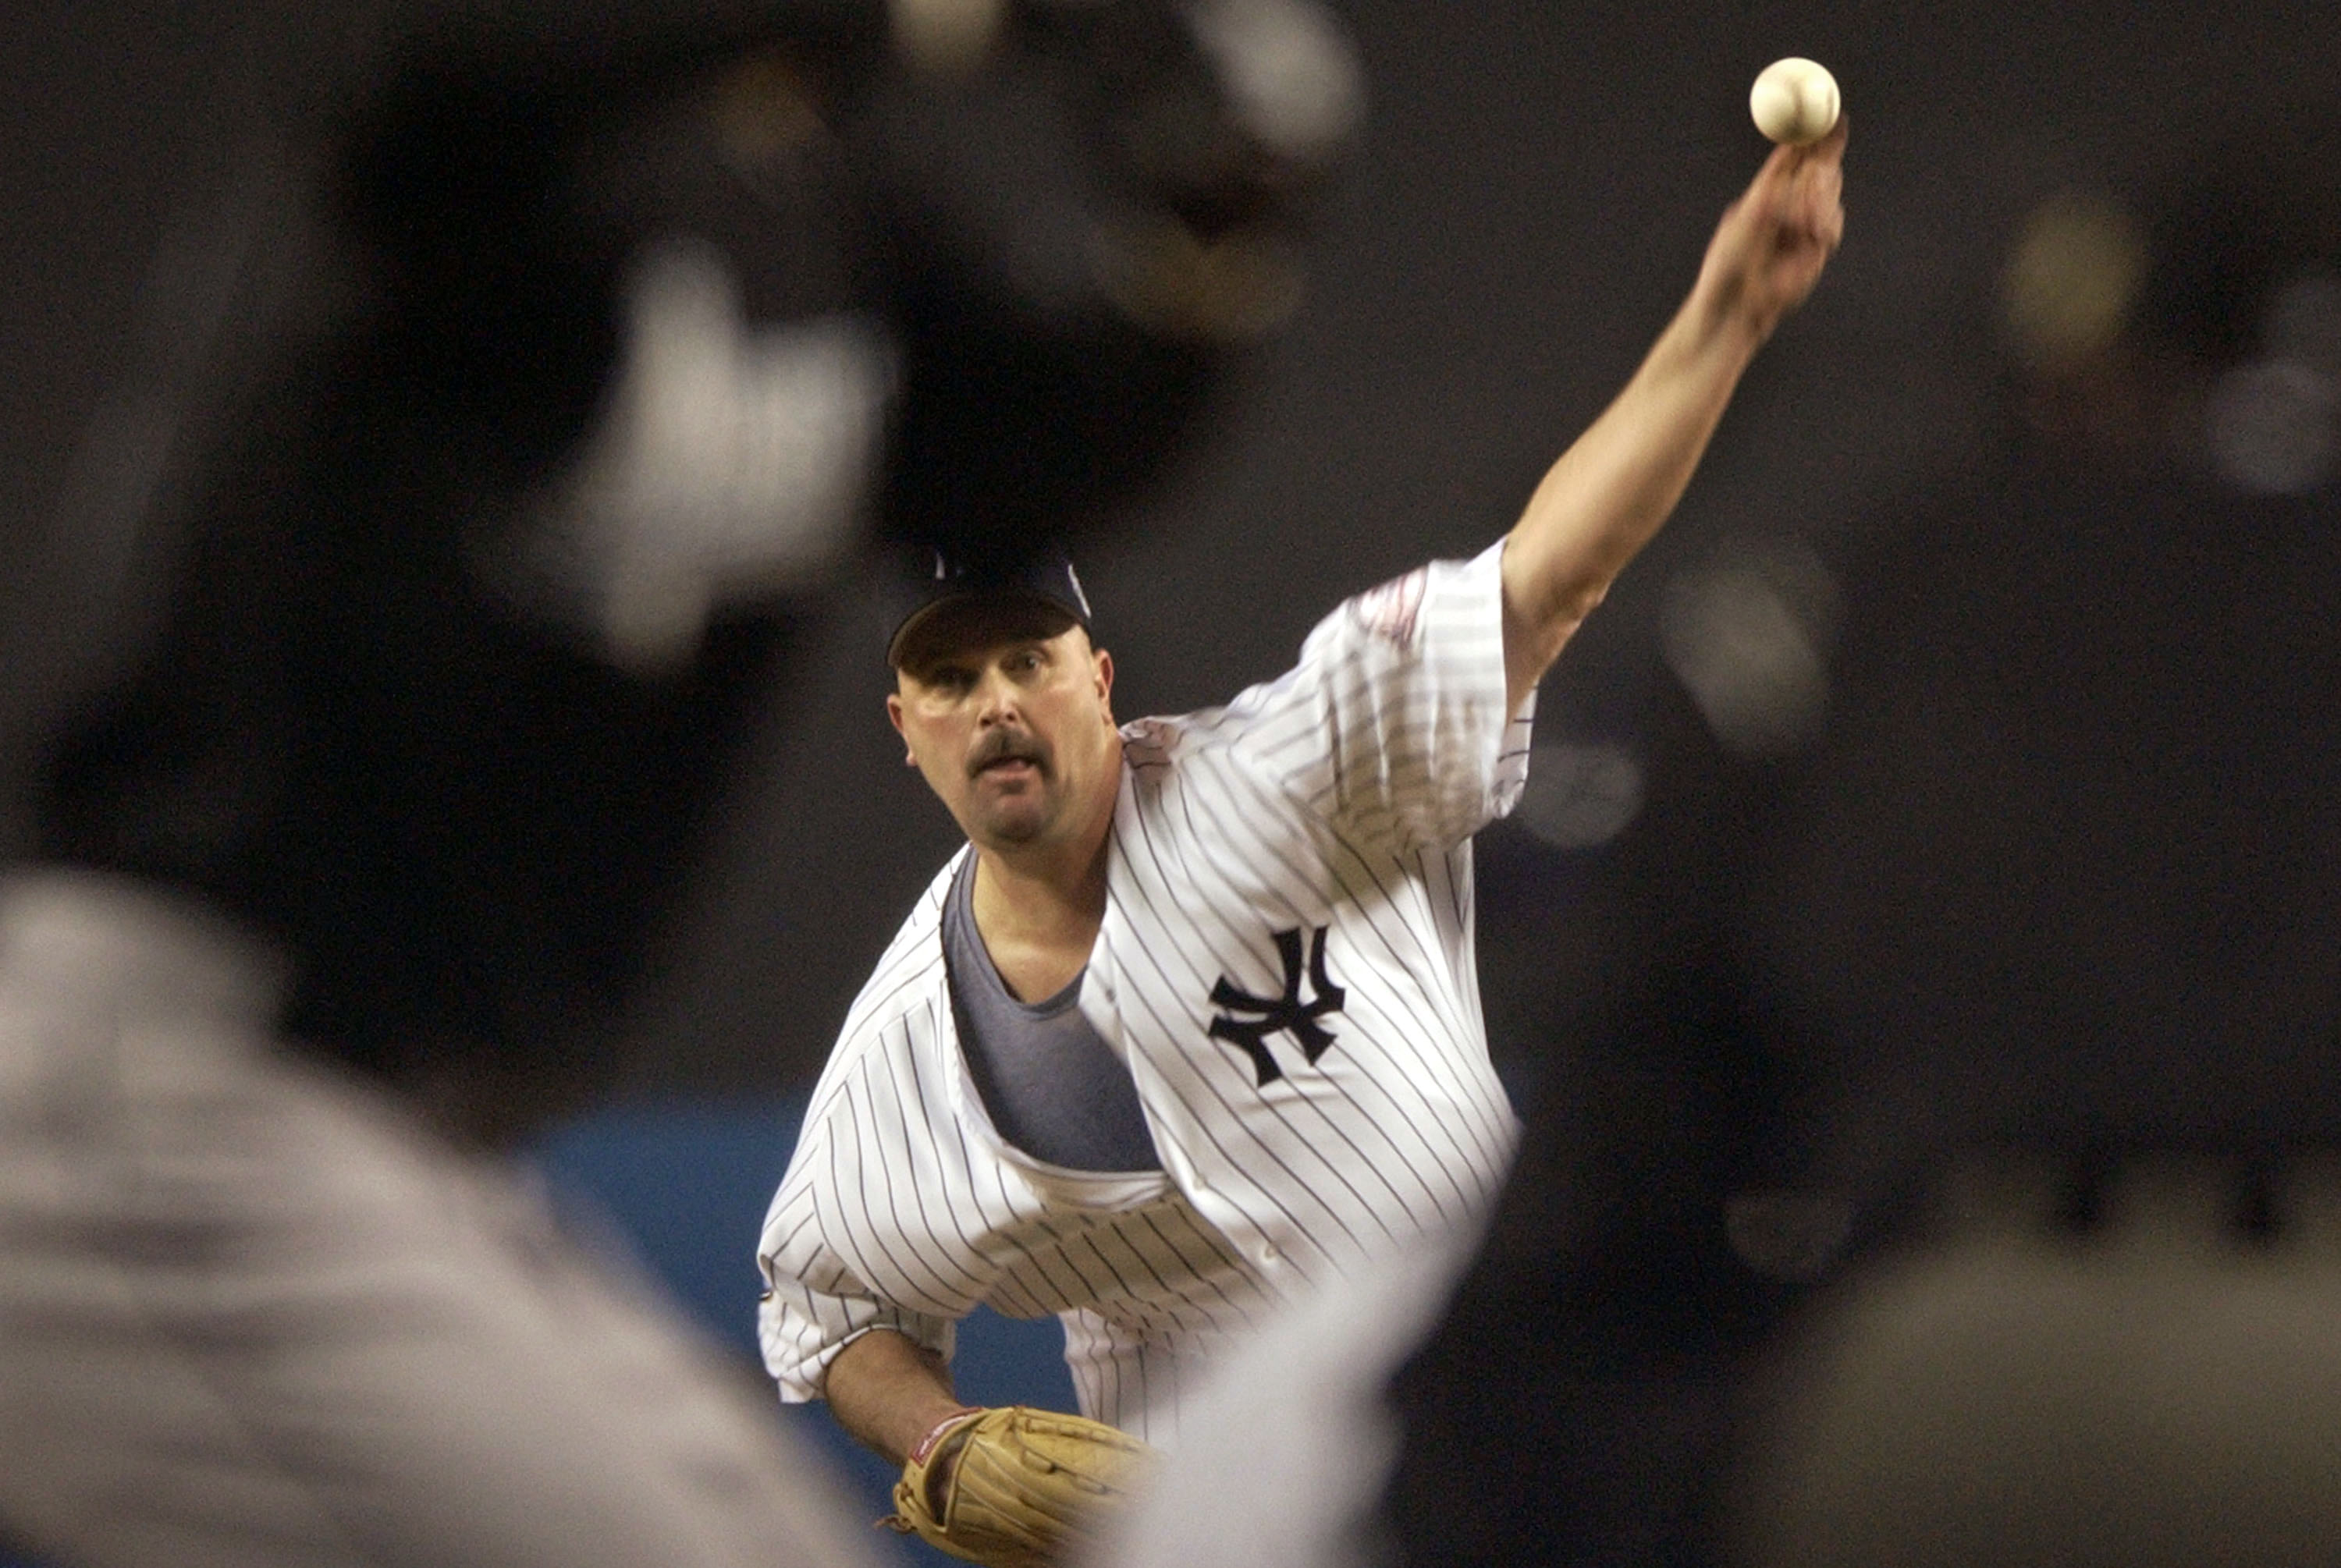 BRONX, NY - OCTOBER 18: Pitcher David Wells #33 of the New York Yankees delivers a pitch against the Florida Marlins during game 1 of the Major League Baseball World Series on October 18, 2003 at Yankee Stadium in the Bronx, New York.  (Photo by Kathy Wil